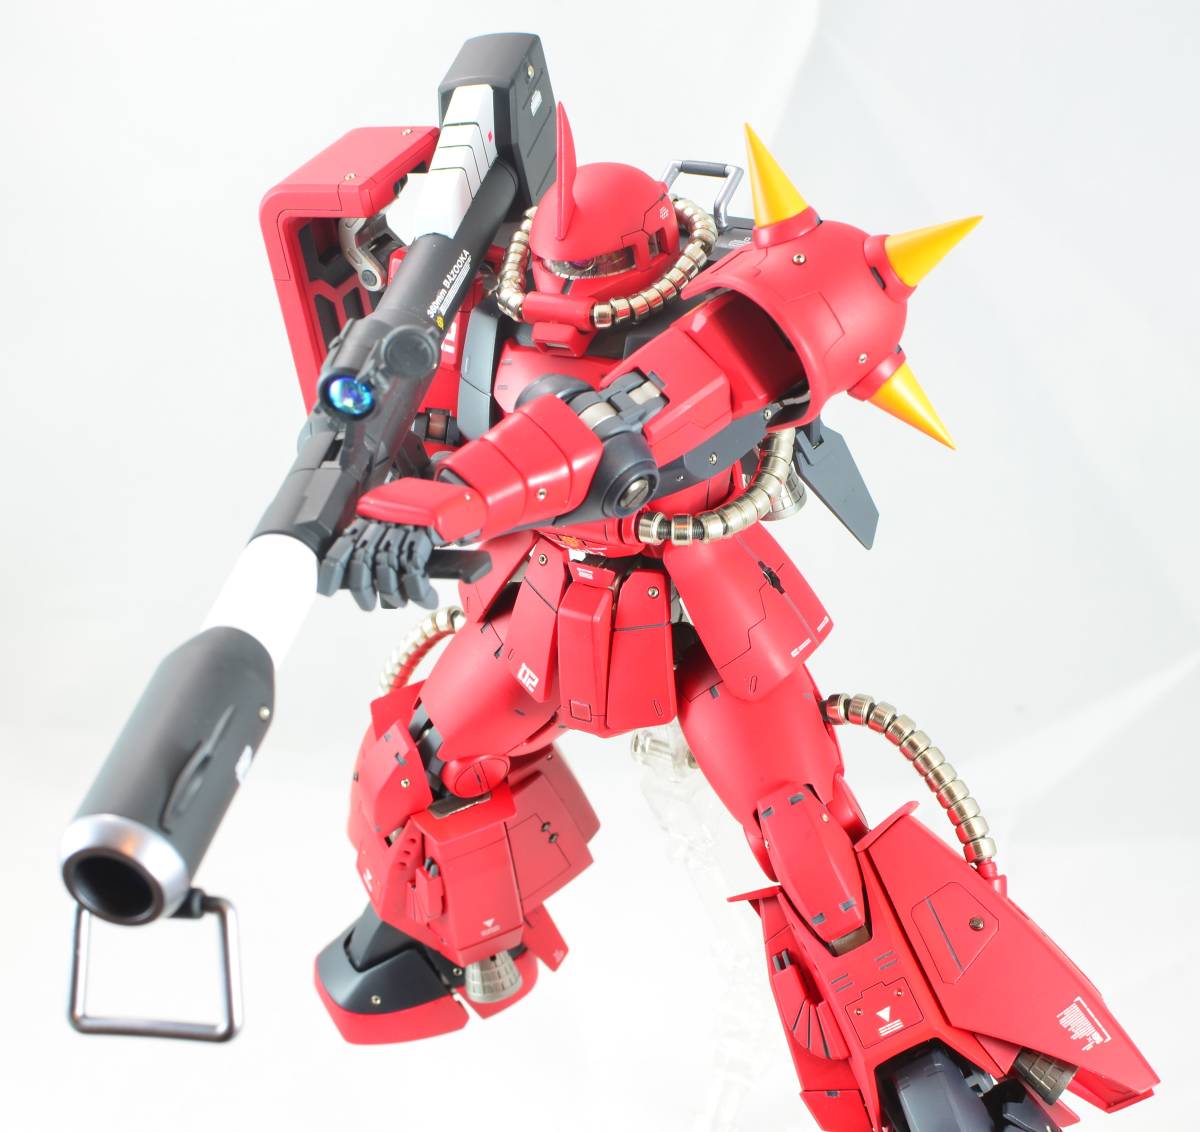 UC 1:100 MS-06R-2 Zaku II High Mobility Type Conversion Kit 真紅閃電 unpainted Details about   K16 